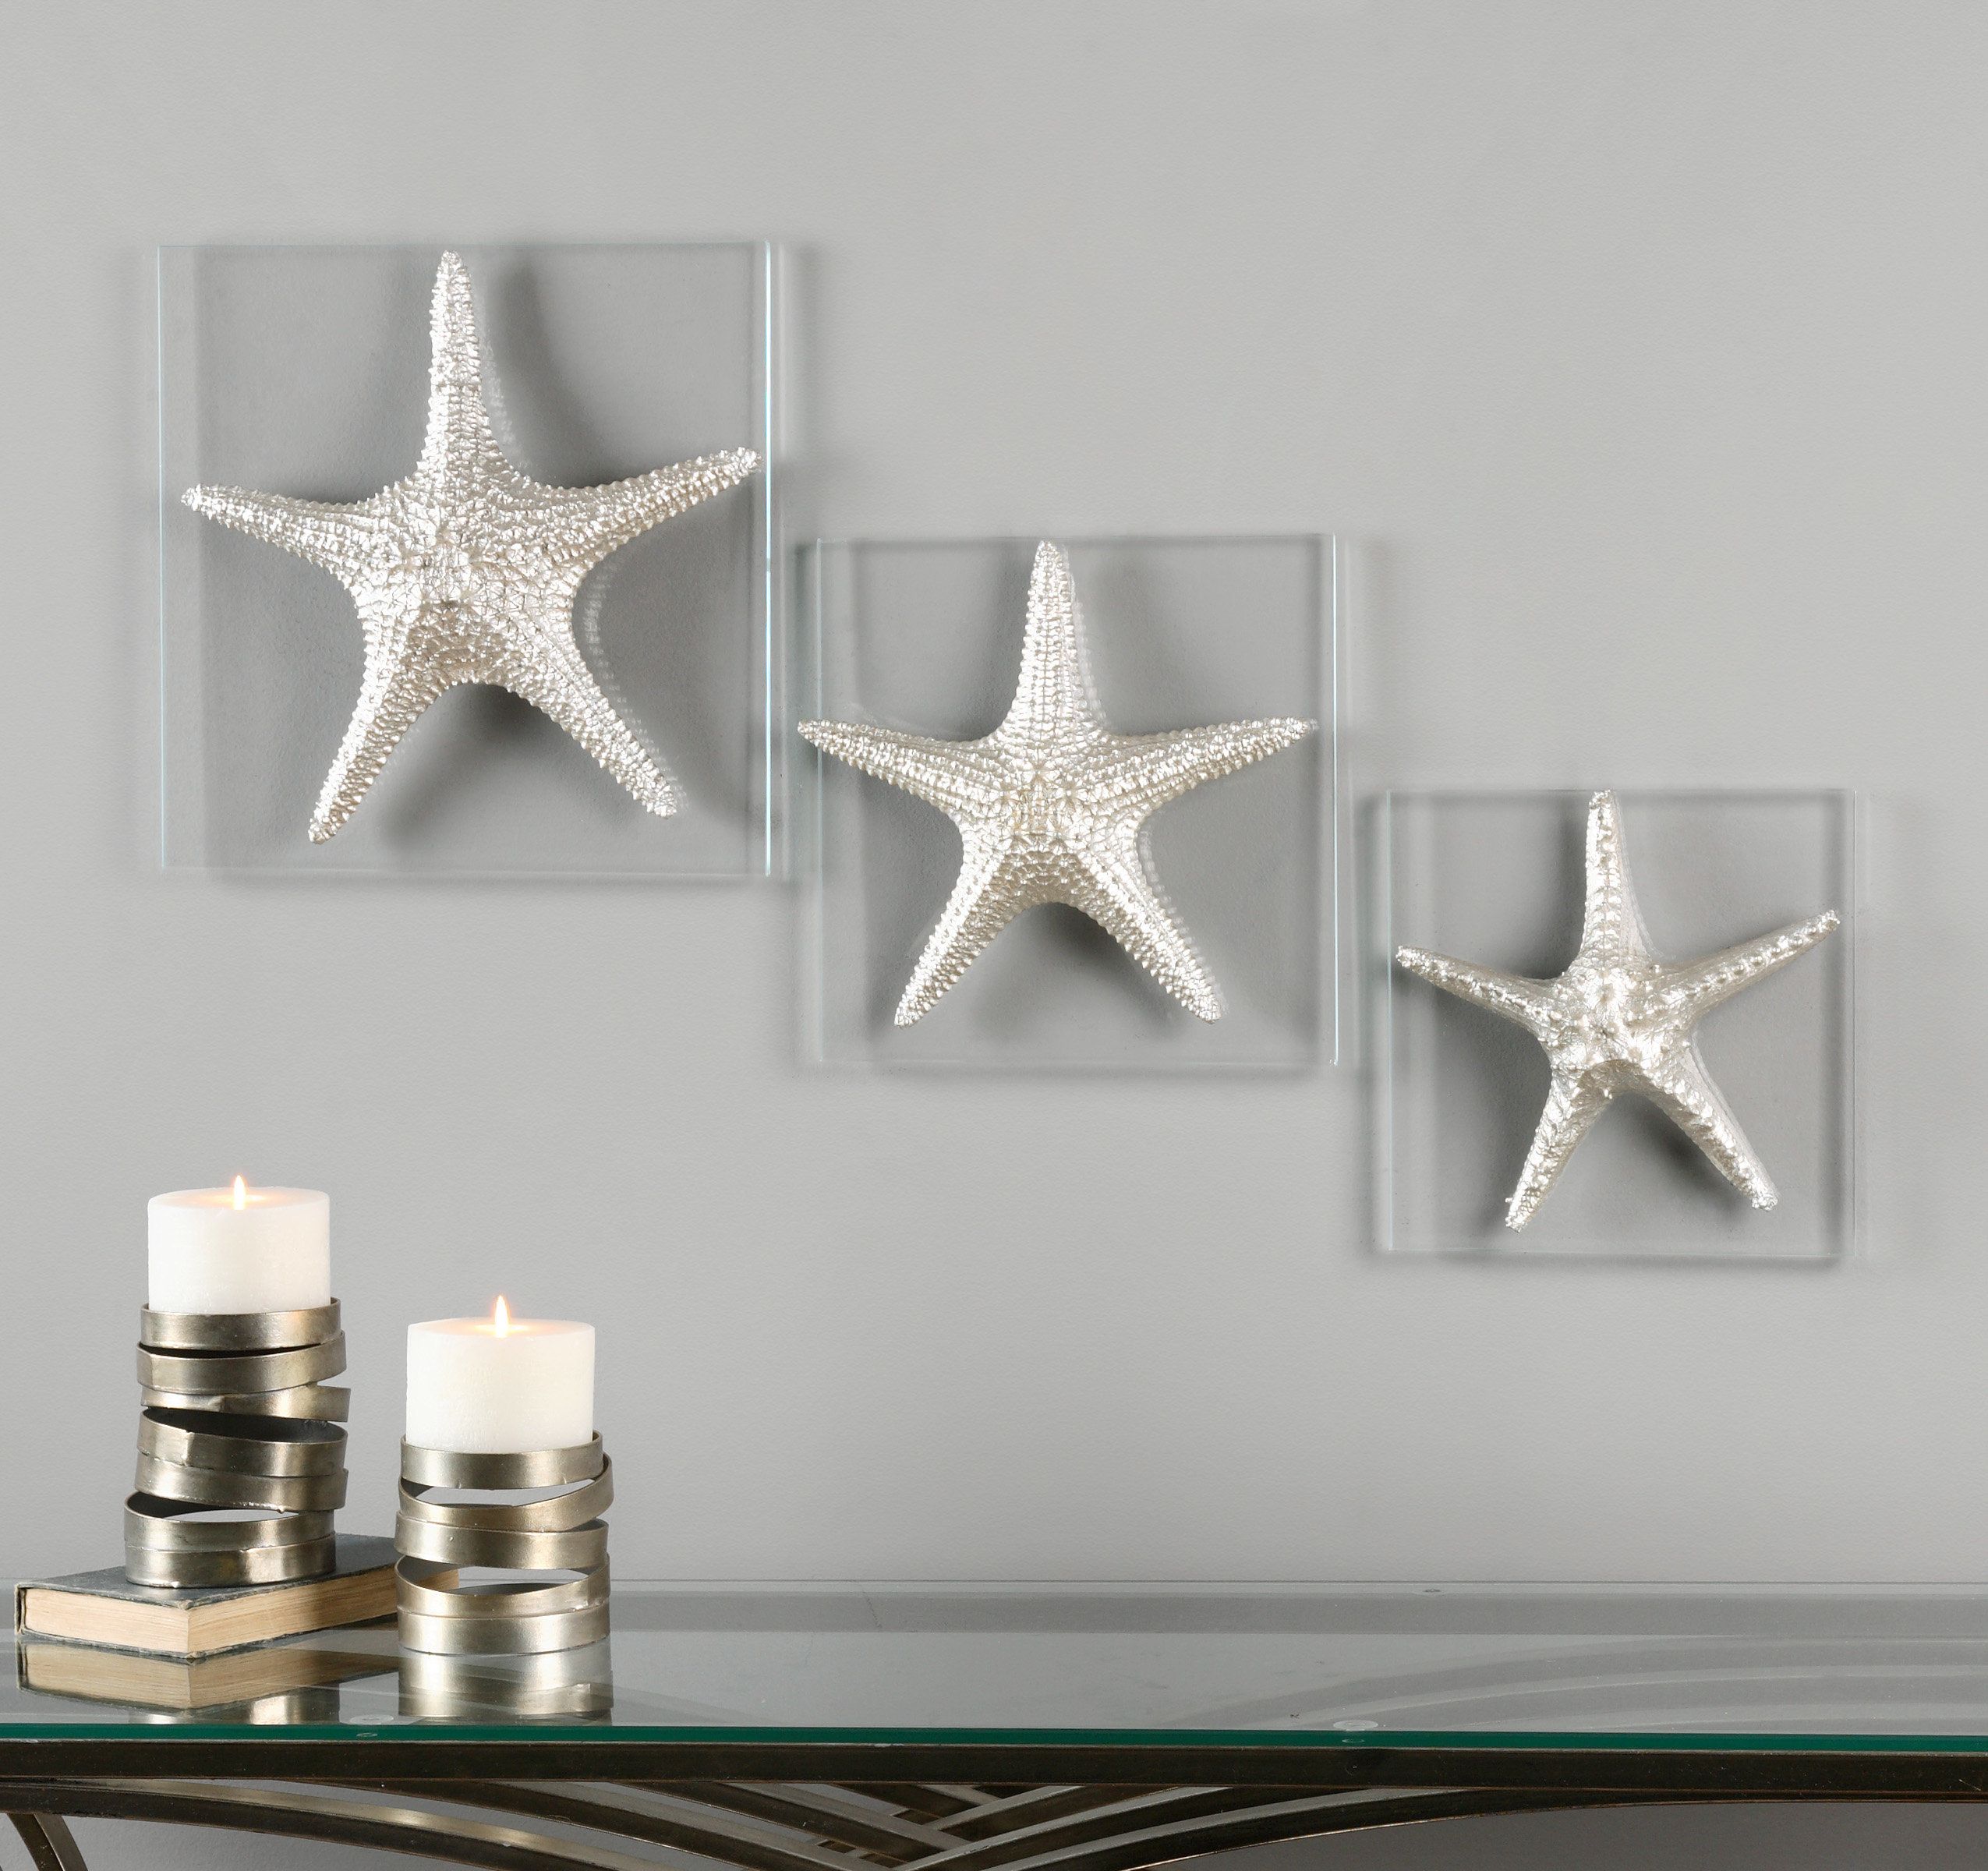 Tolliver 3 Piece Metal Wall Decor Set Pertaining To 3 Piece Star Wall Decor Sets (View 15 of 30)